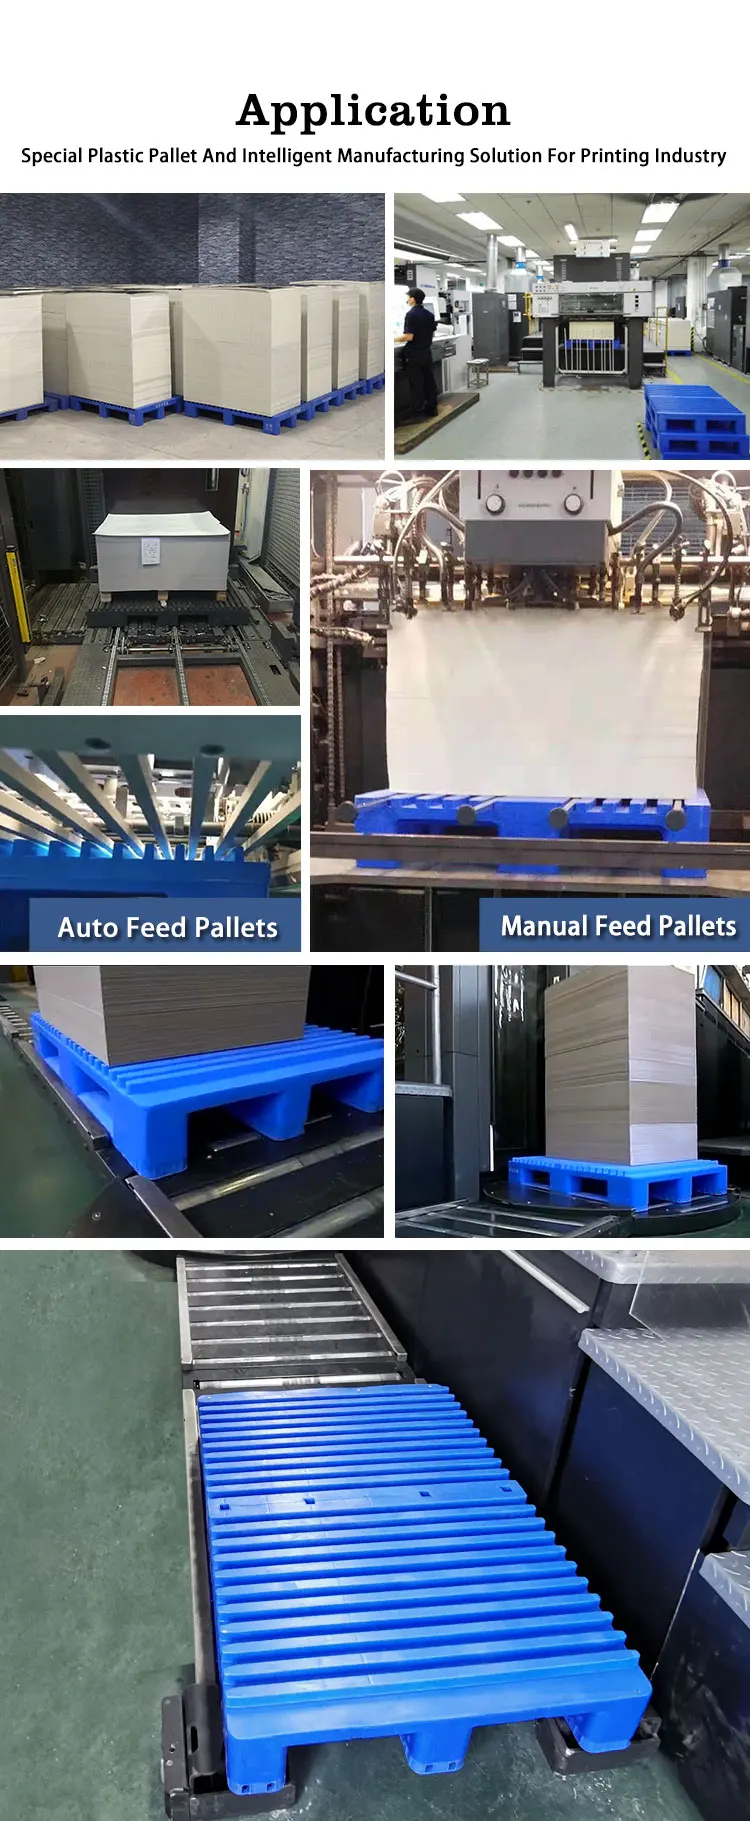 Factory design Pakistan pallet offset printing machine pallet for Corrugated and Flexible packaging pallet